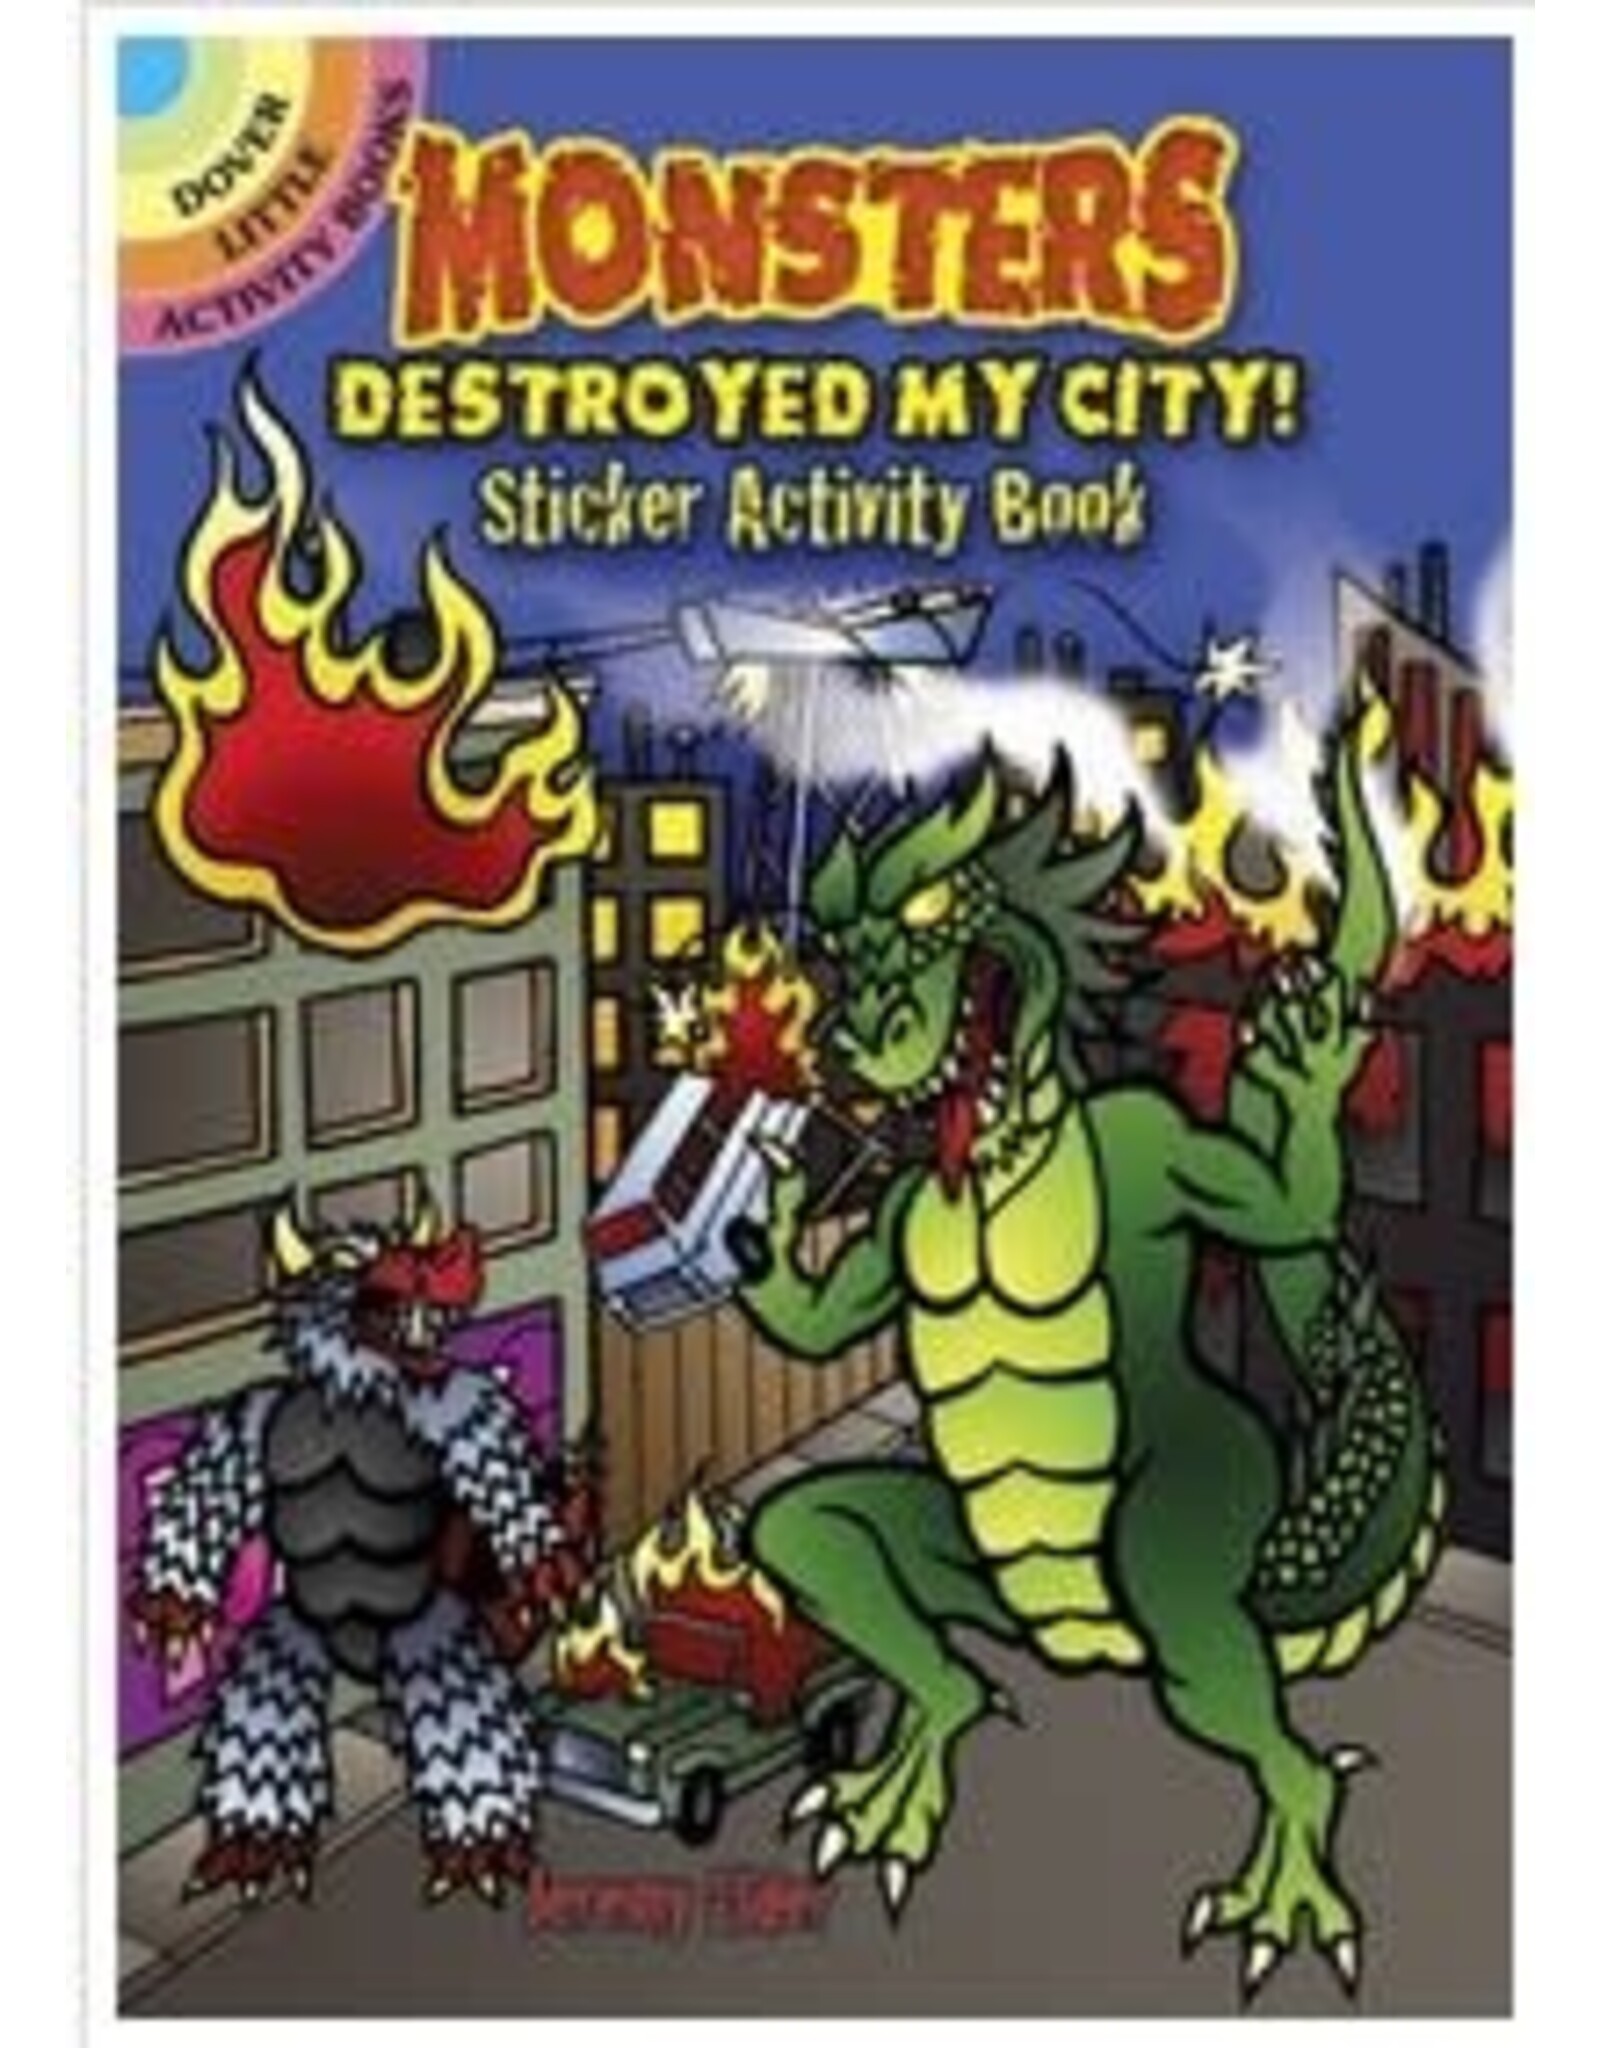 Dover Publications Monsters Destroyed My City! Sticker Activity Book by j elder